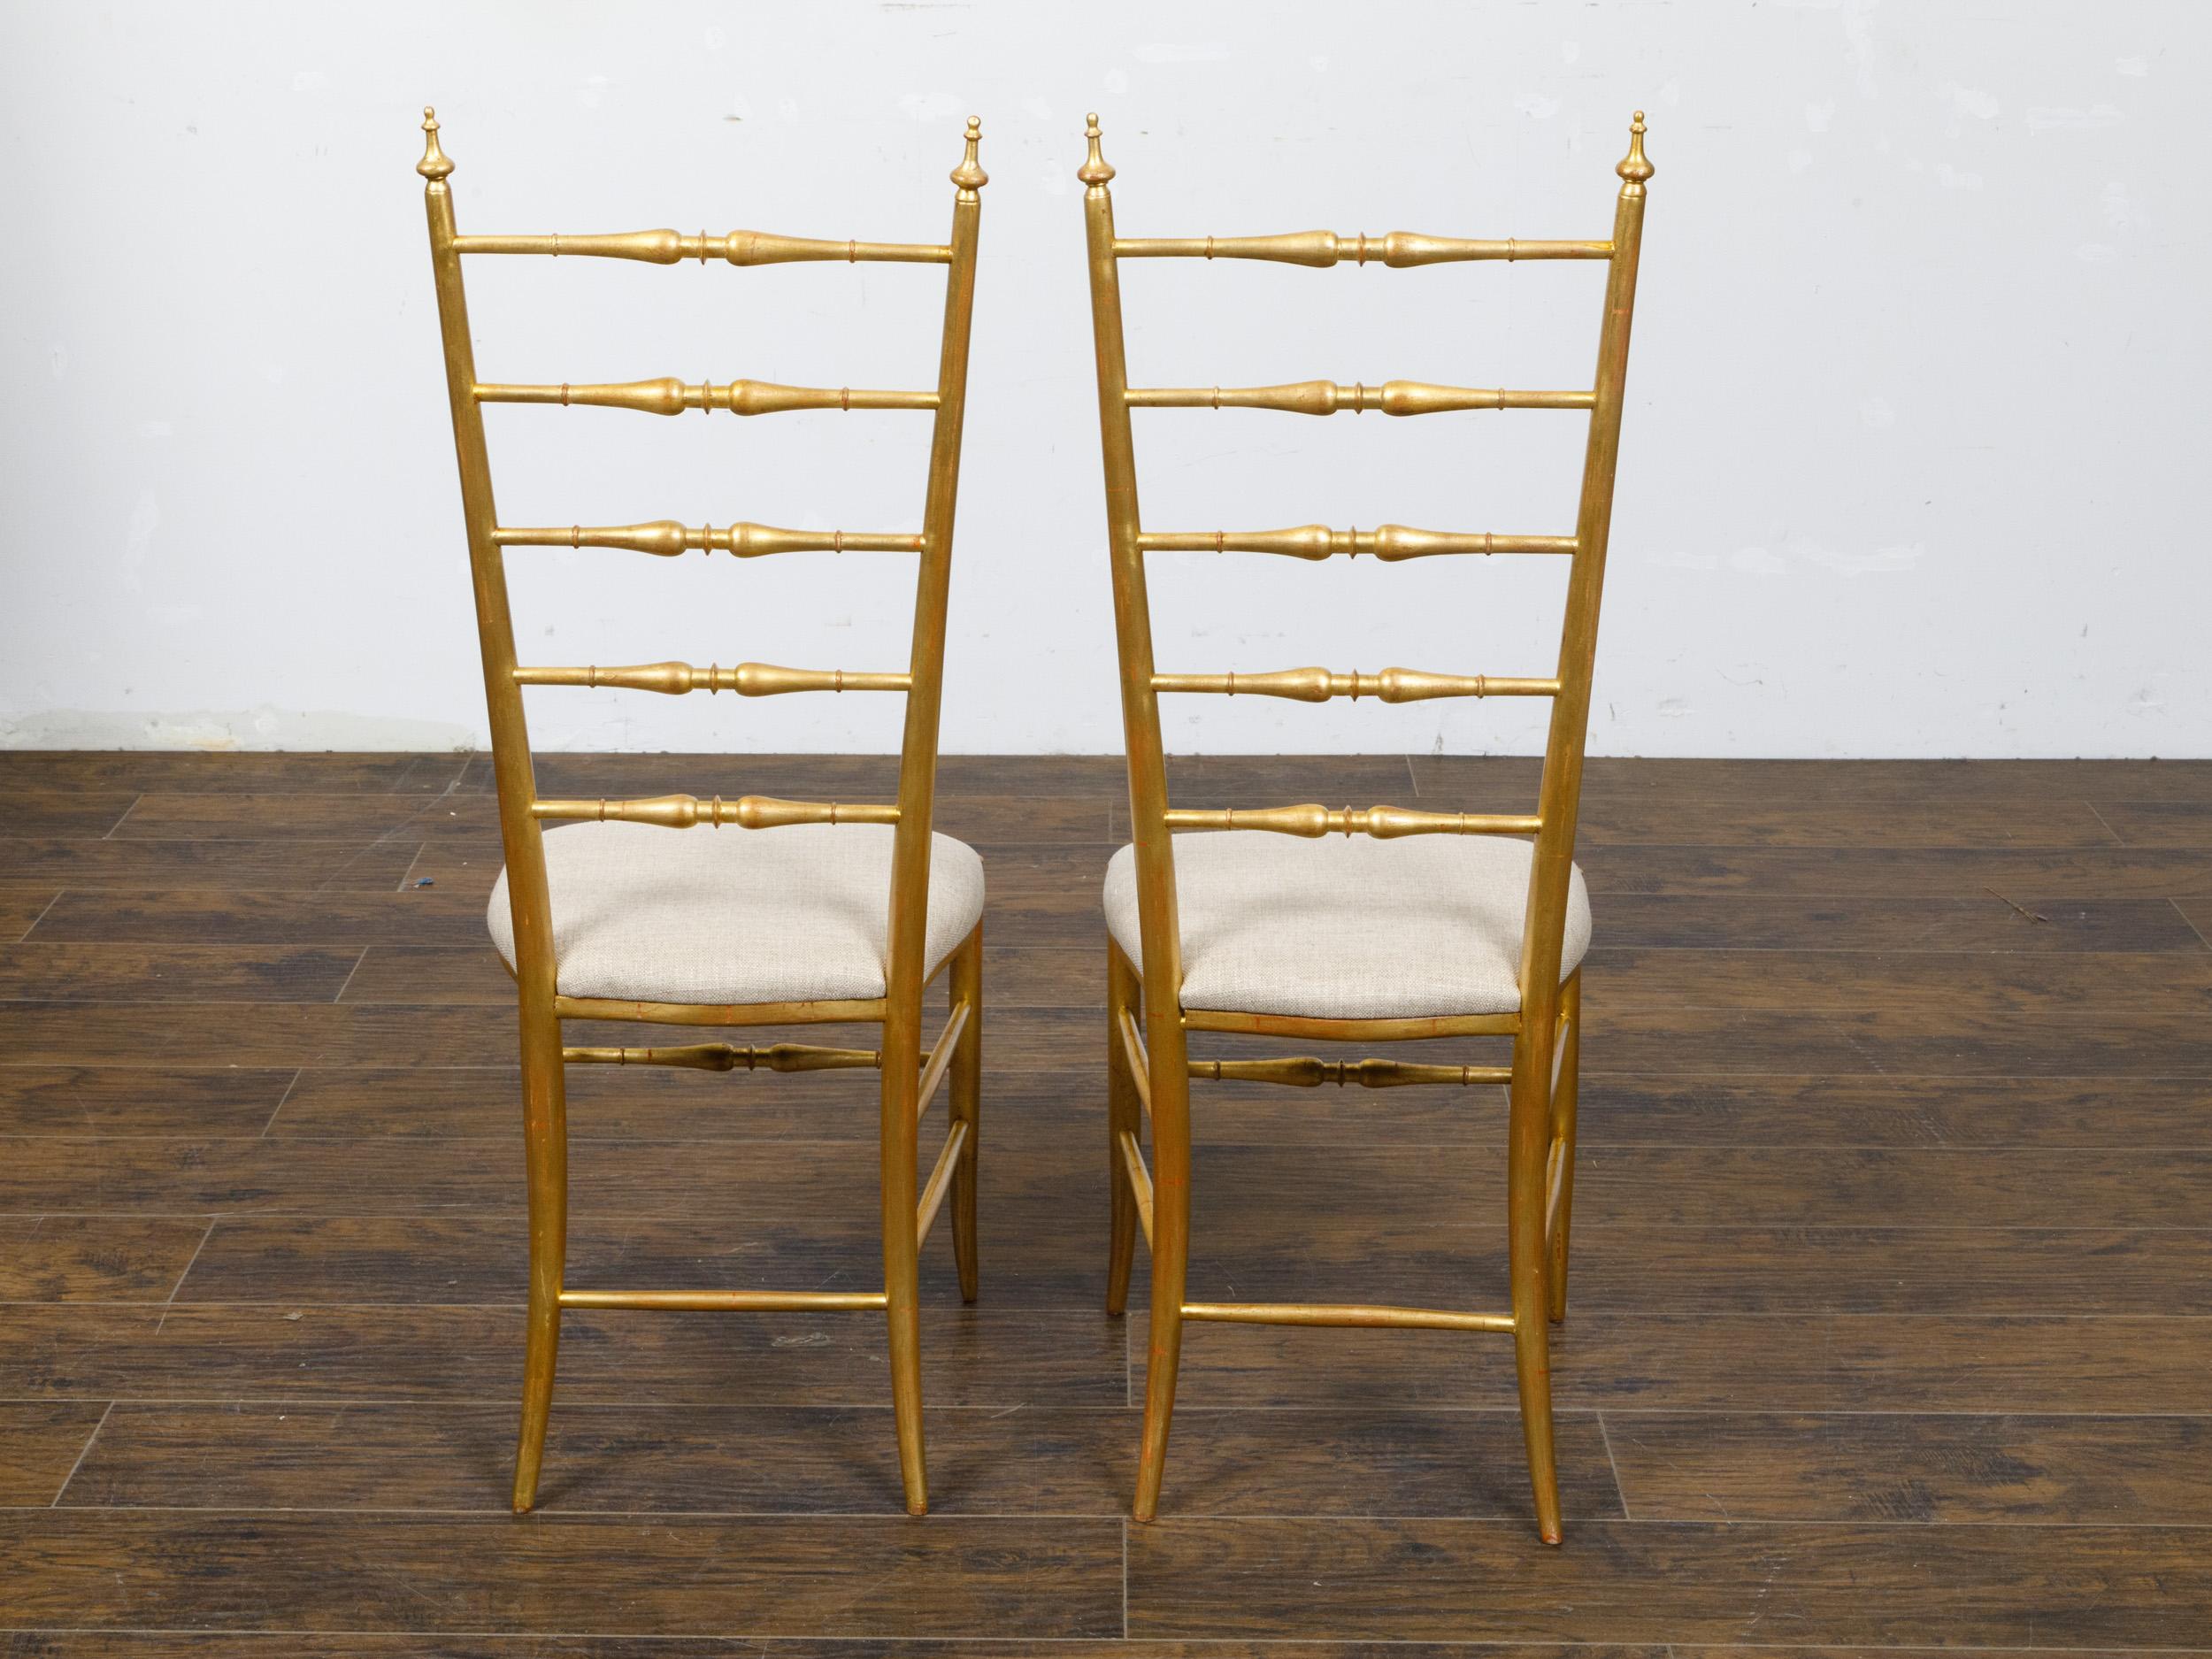 Pair of Midcentury Italian Gilt Wood High Back Side Chairs with Upholstery In Good Condition For Sale In Atlanta, GA